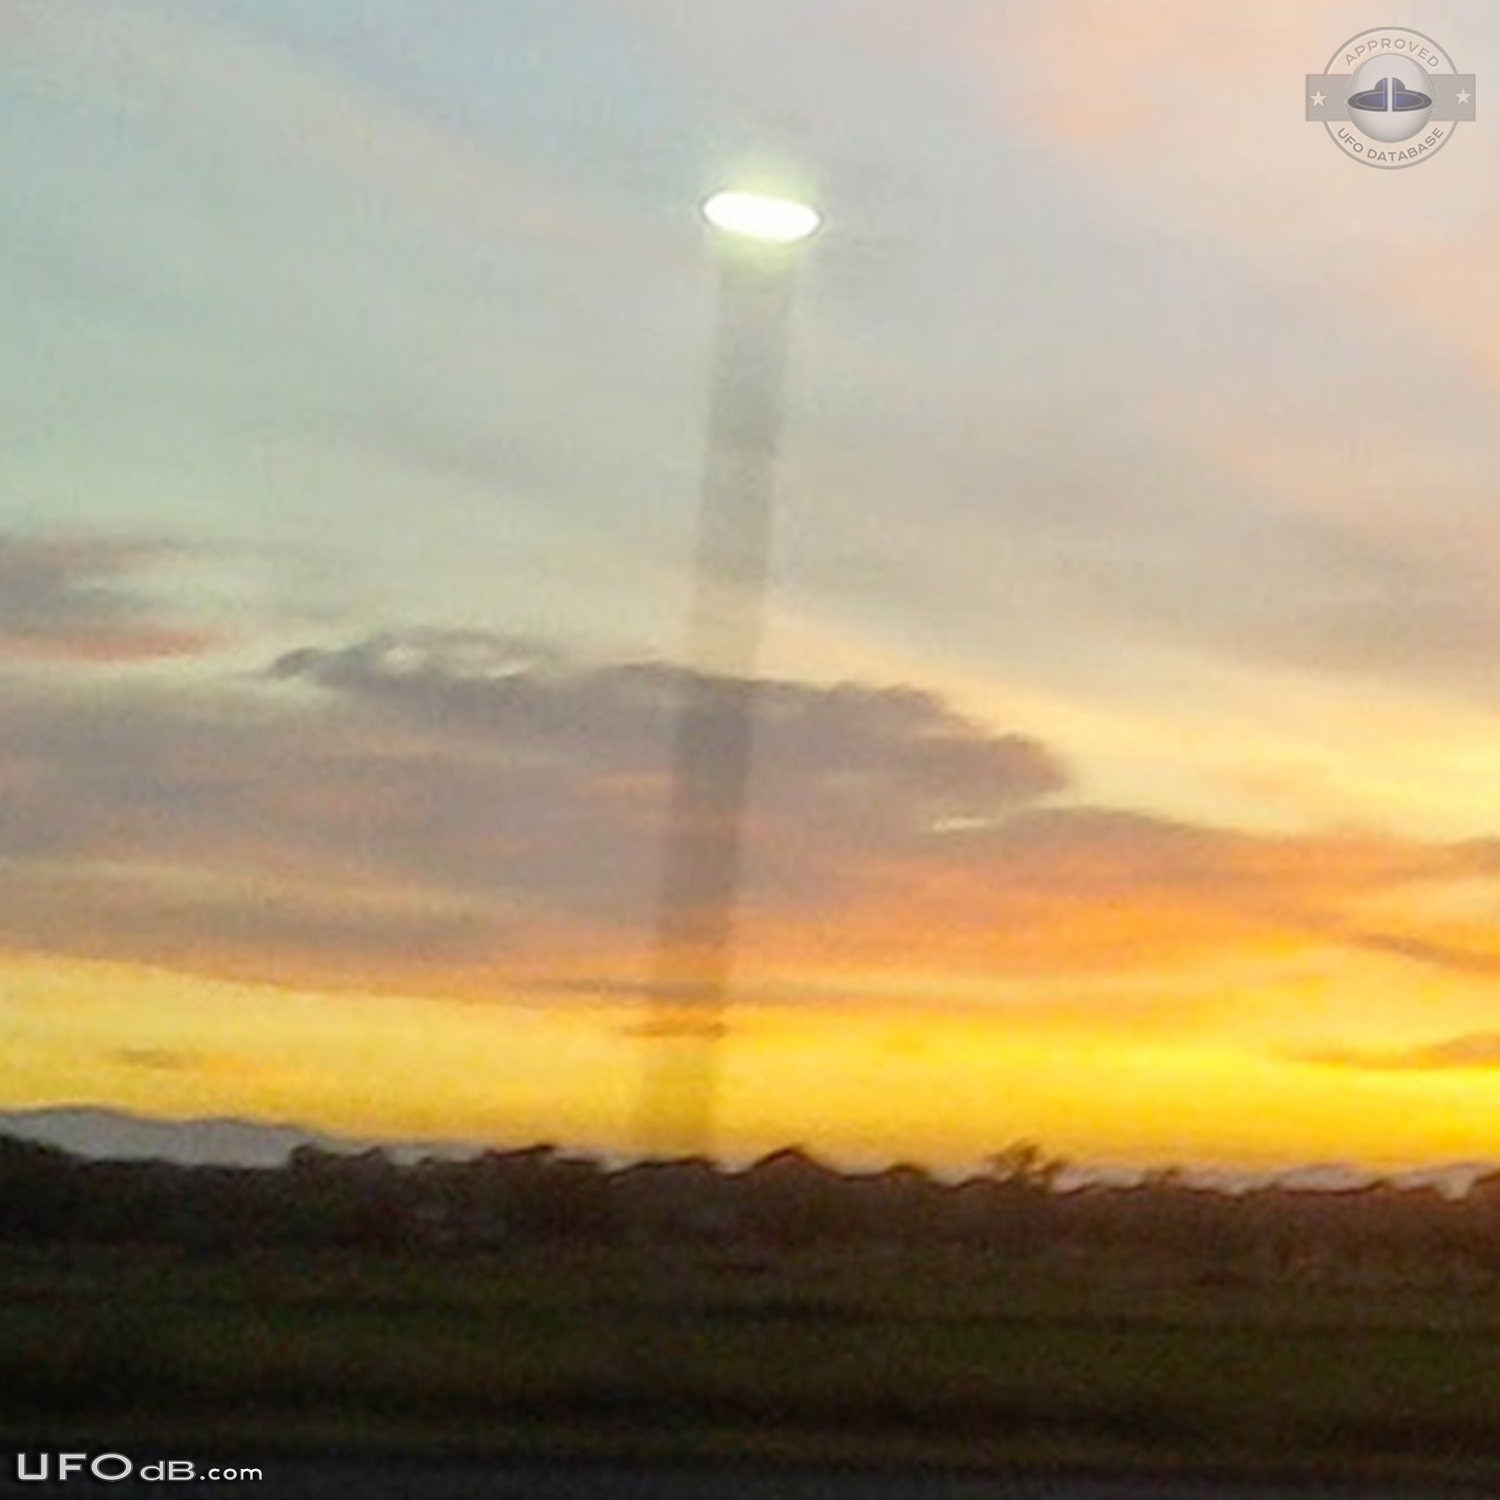 UFO saucer caught from car in Cottonwood California USA 2014 UFO Picture #589-3